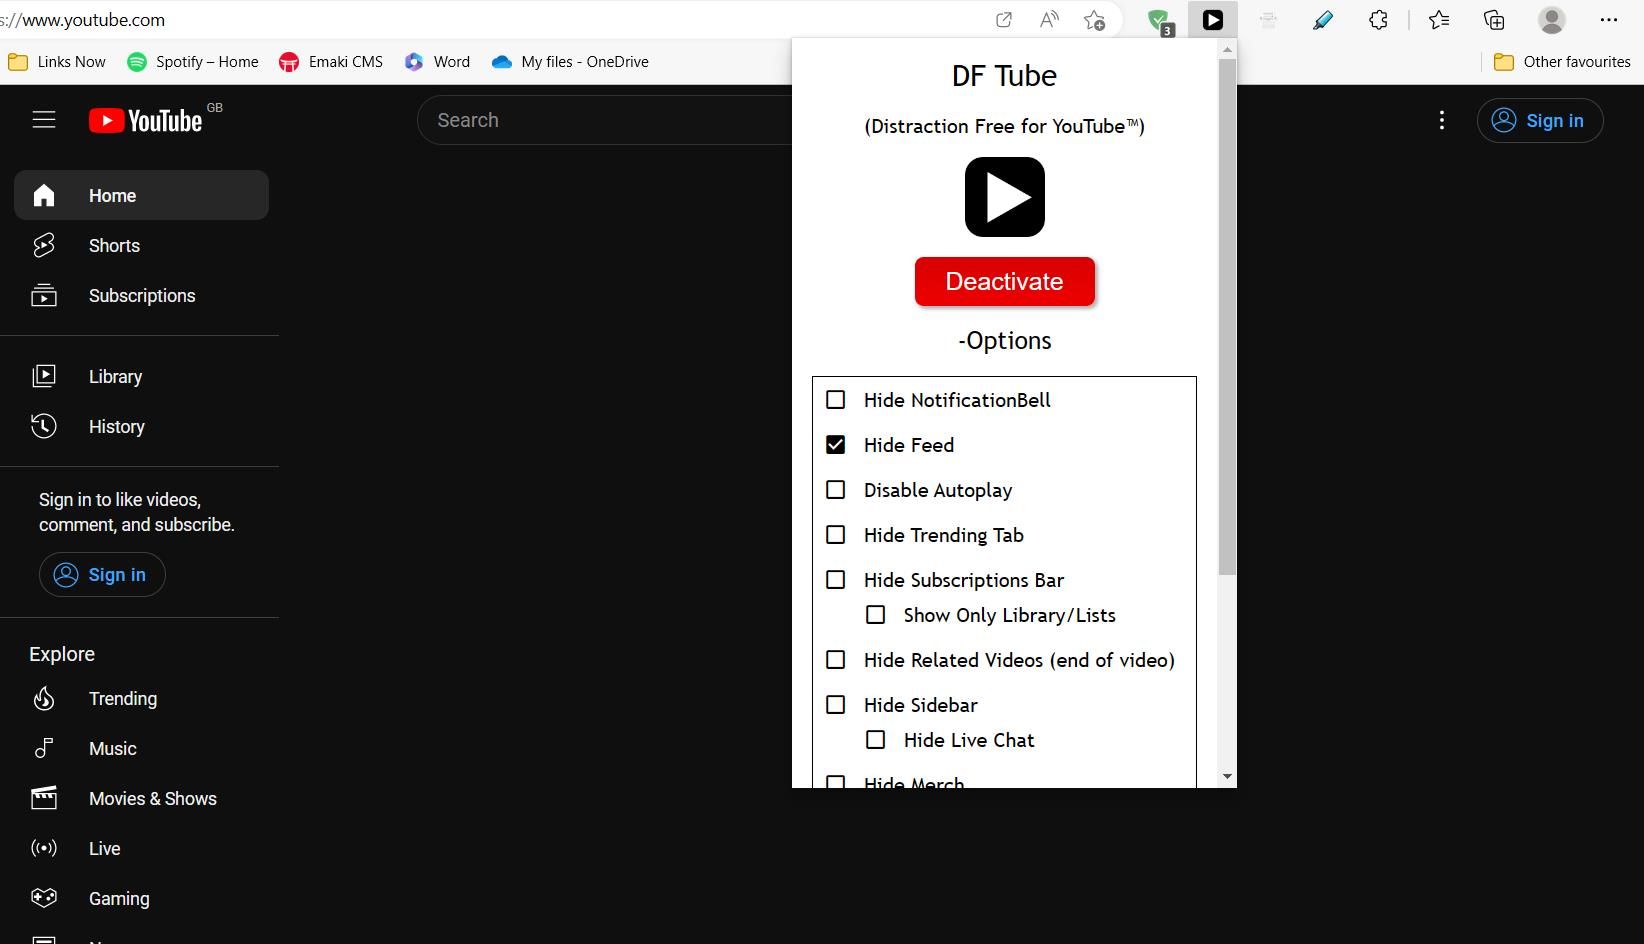 DF Tube Extension Activated on YouTube Homepage